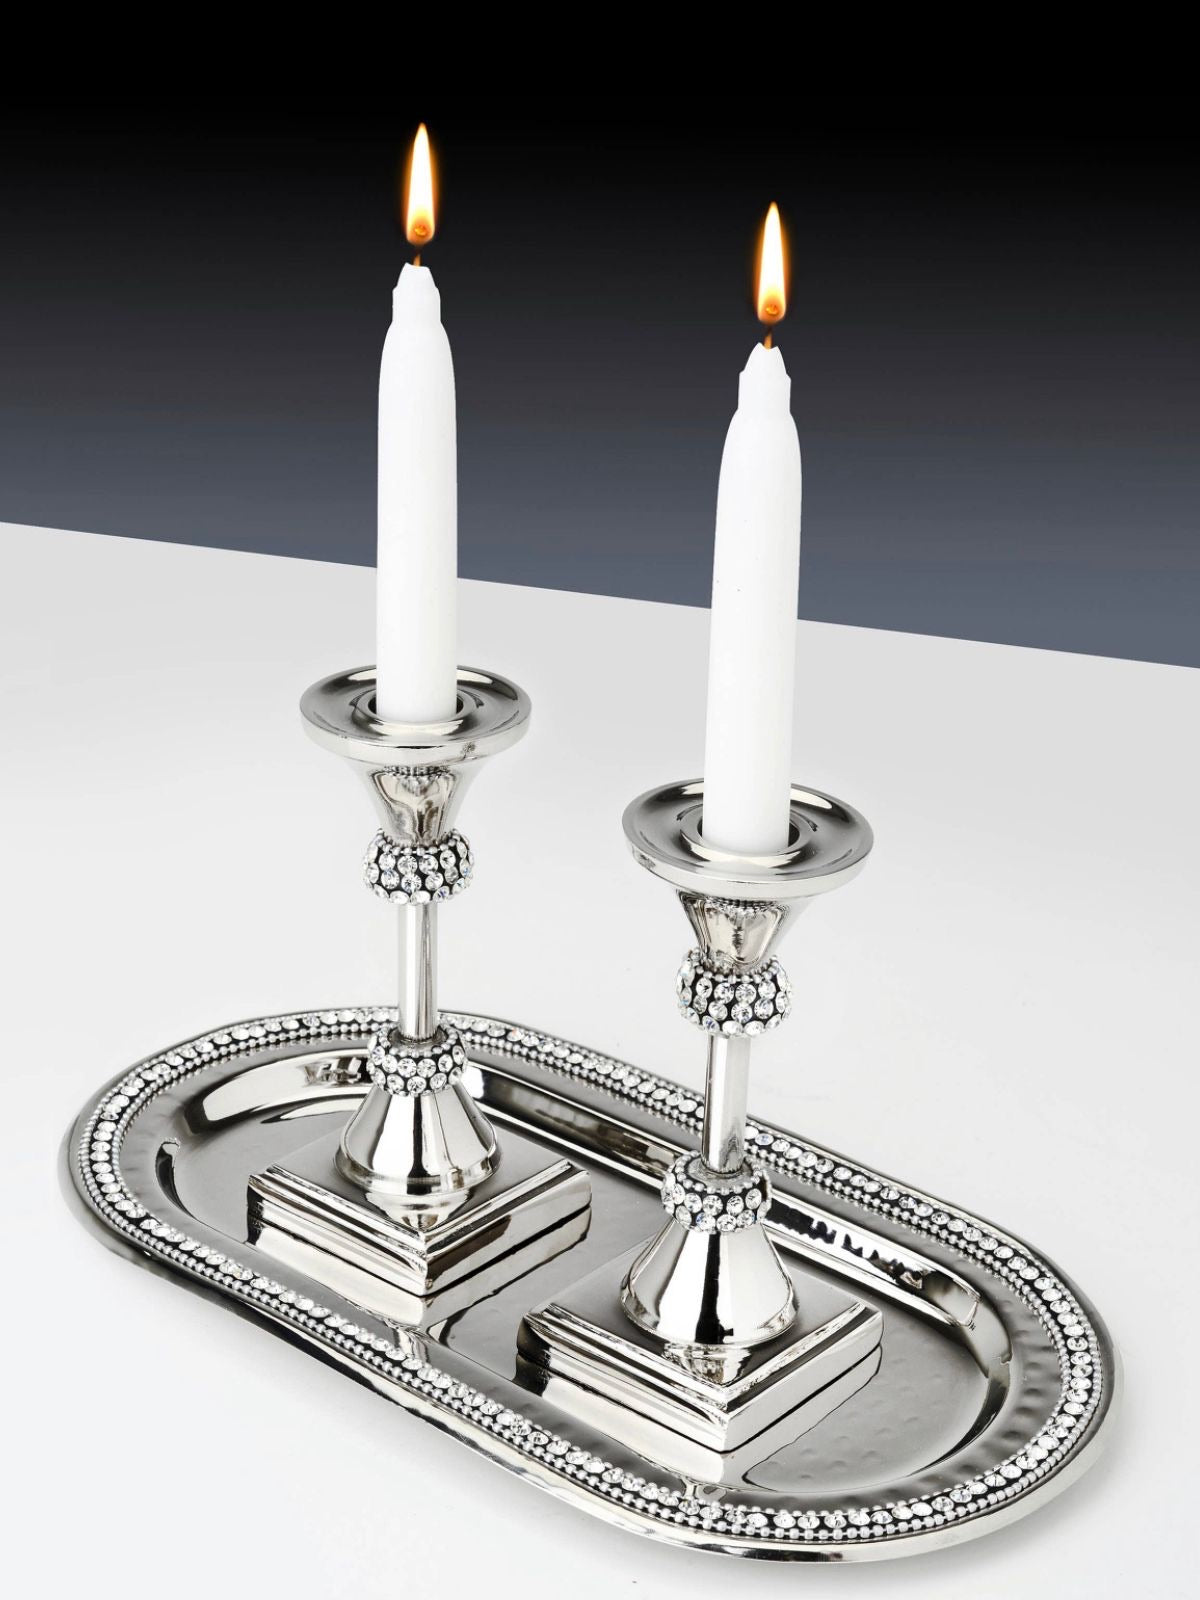 L Stainless Steel Oval Tray with Diamond Edges adorned with Candles.